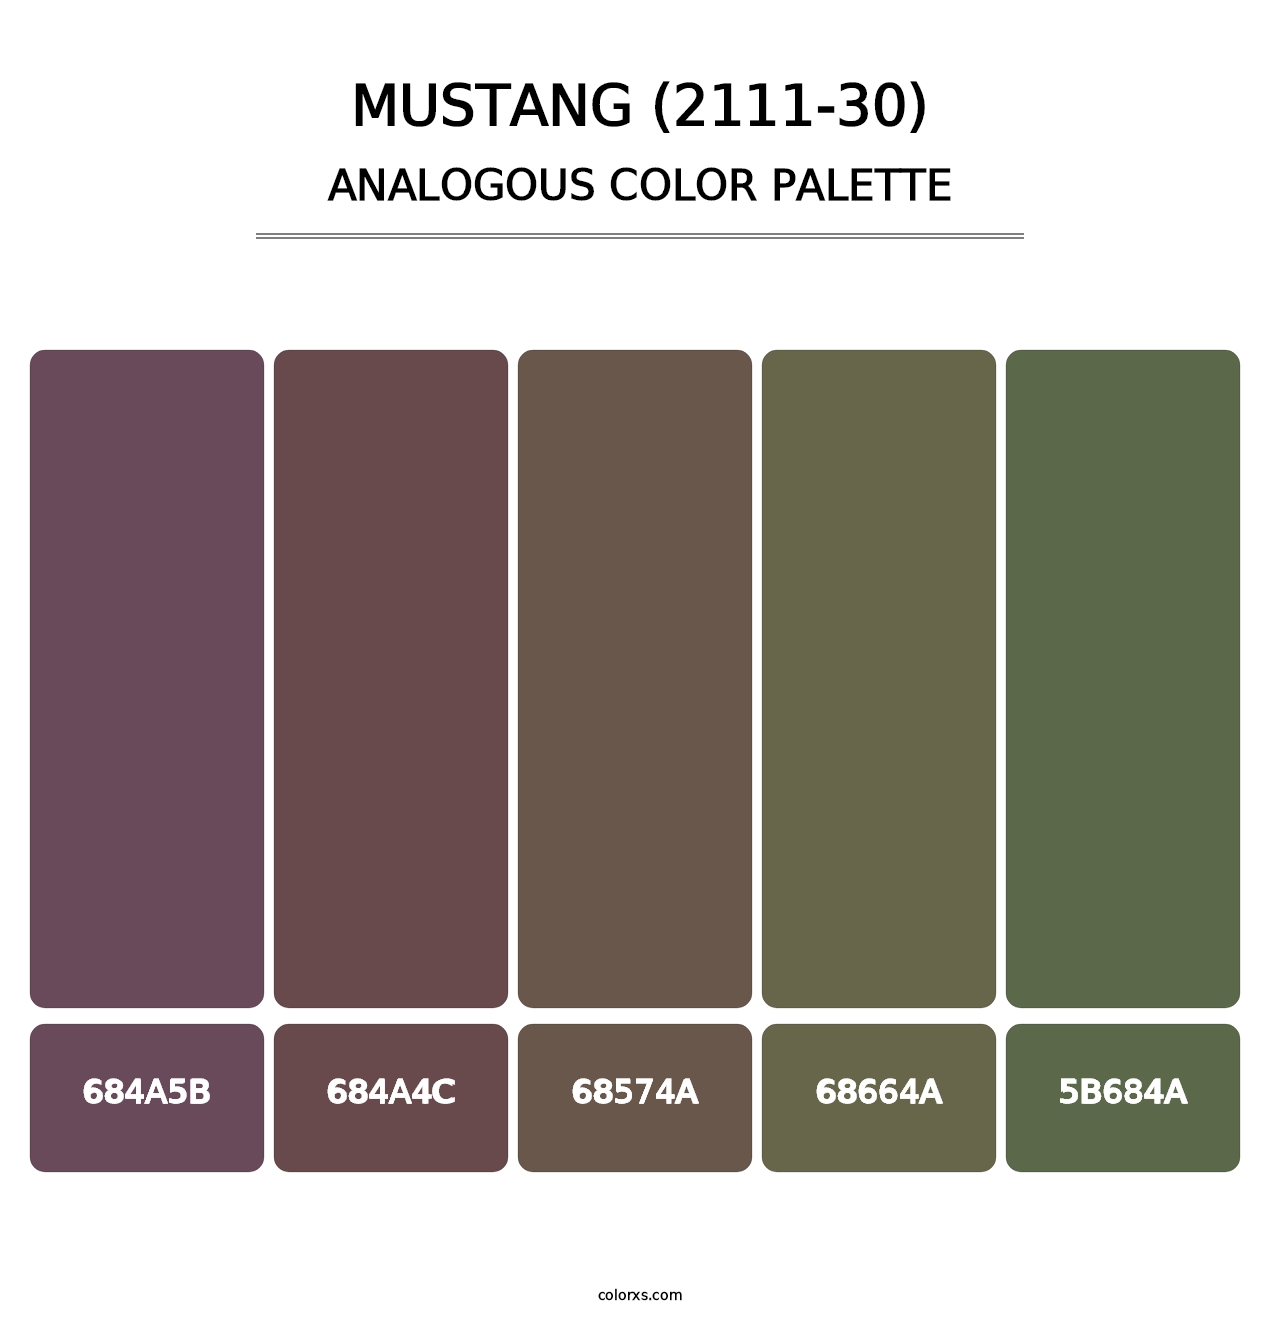 Mustang (2111-30) - Analogous Color Palette